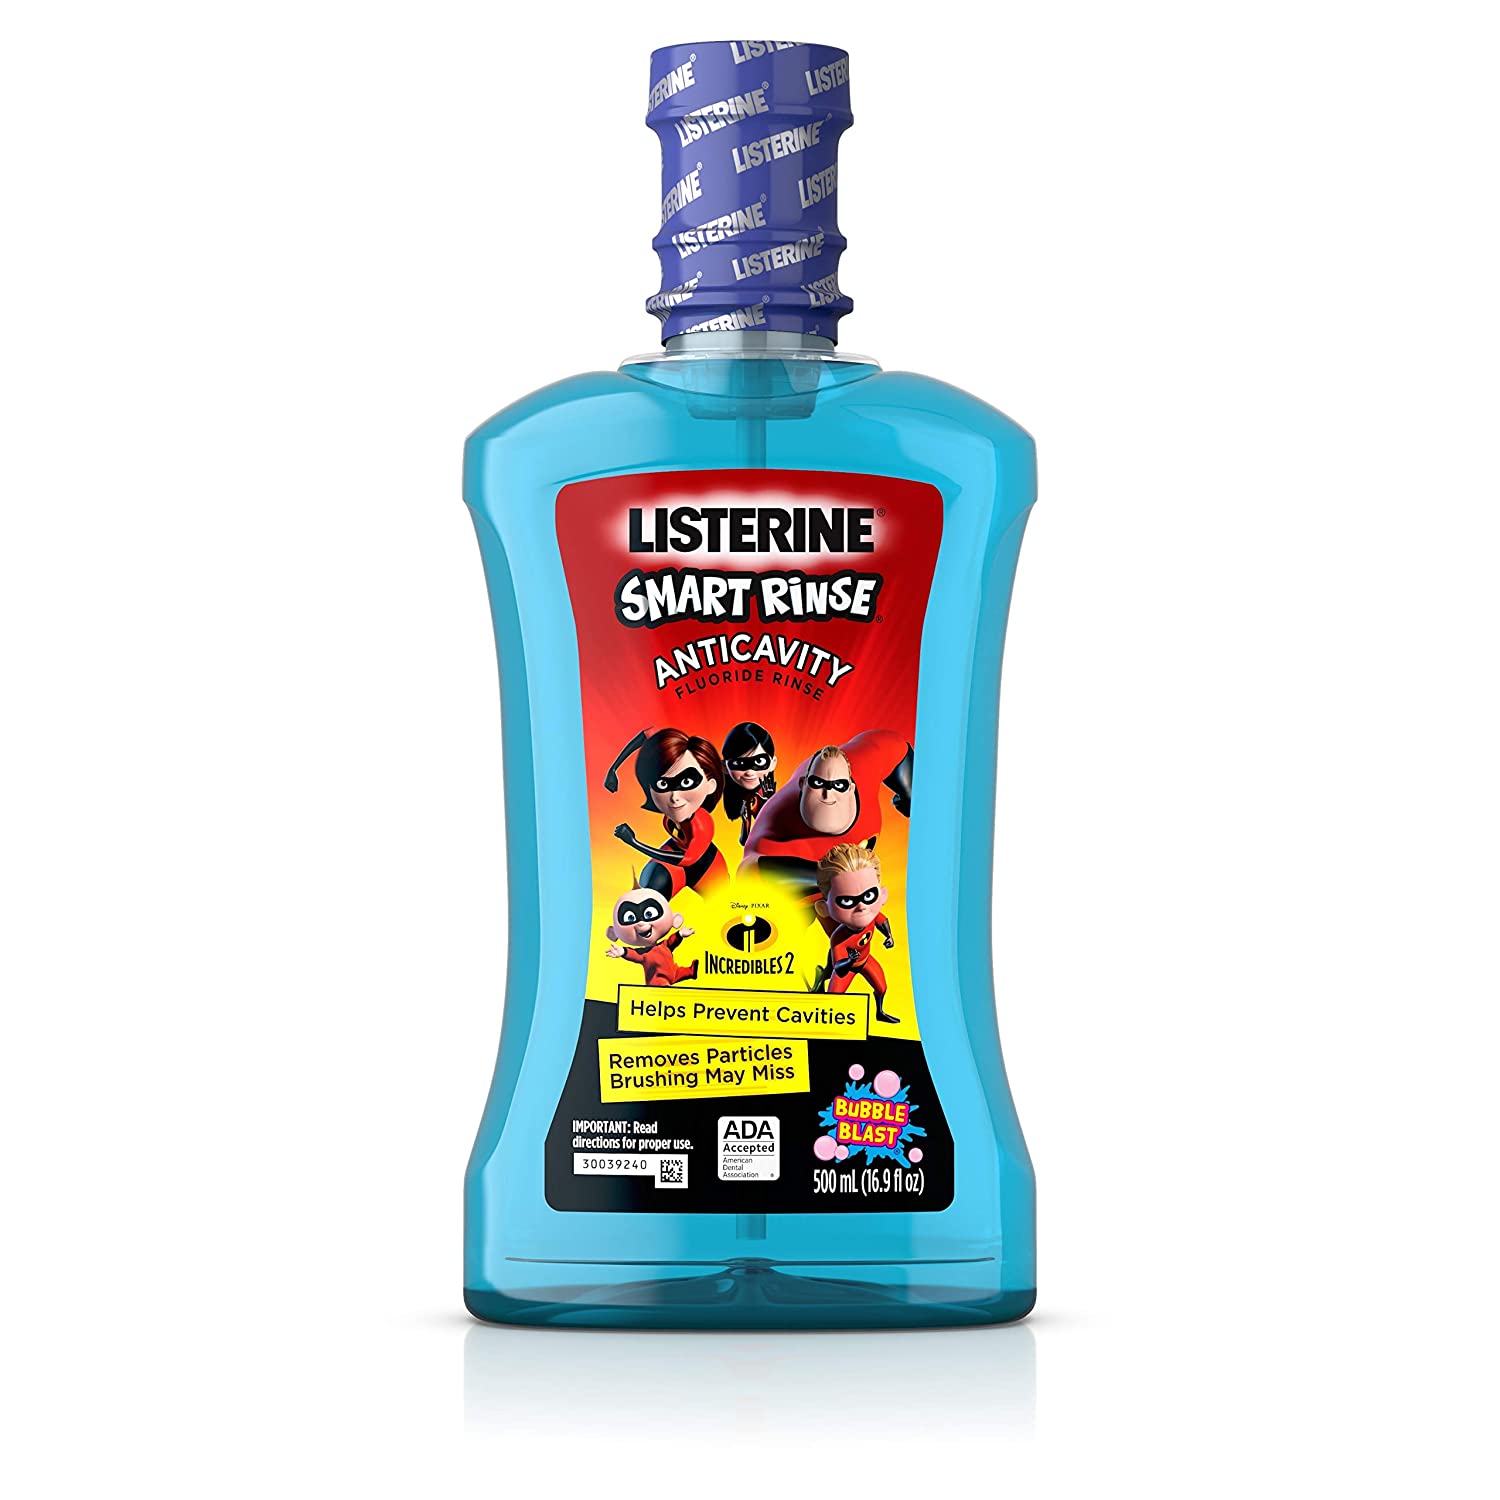 Listerine Smart Rinse Kids Alcohol-Free Anticavity Fluoride Mouthwash Featuring Disney/Pixar Incredibles 2 Packaging, Bubble Blast Flavor